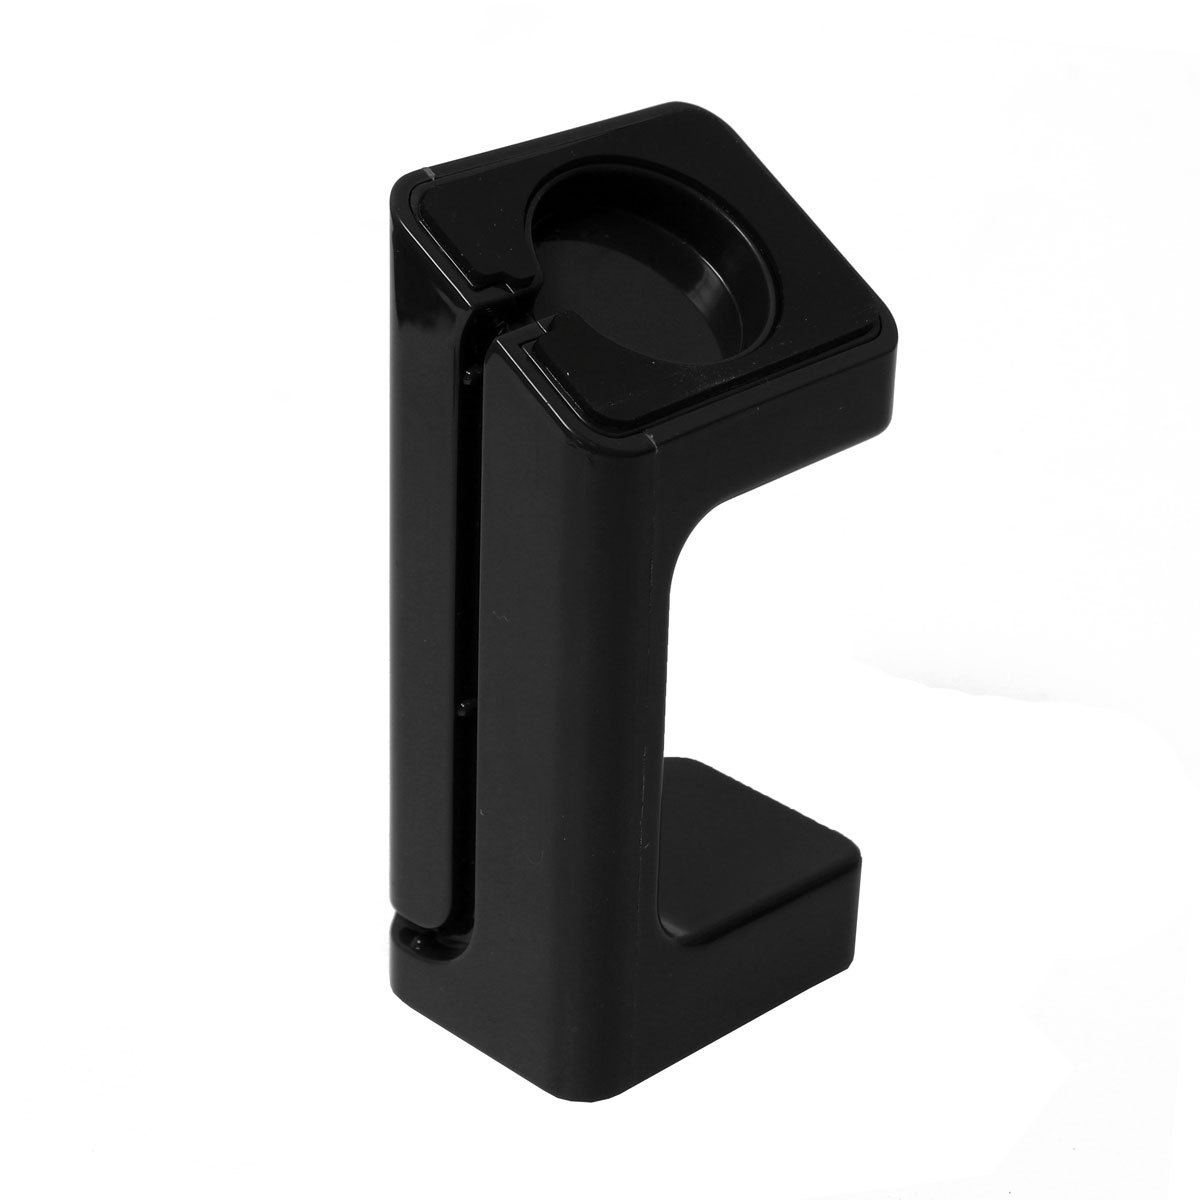 Charging Stand Smart Watch Display Holder For Apple Watch Series 1/2/3